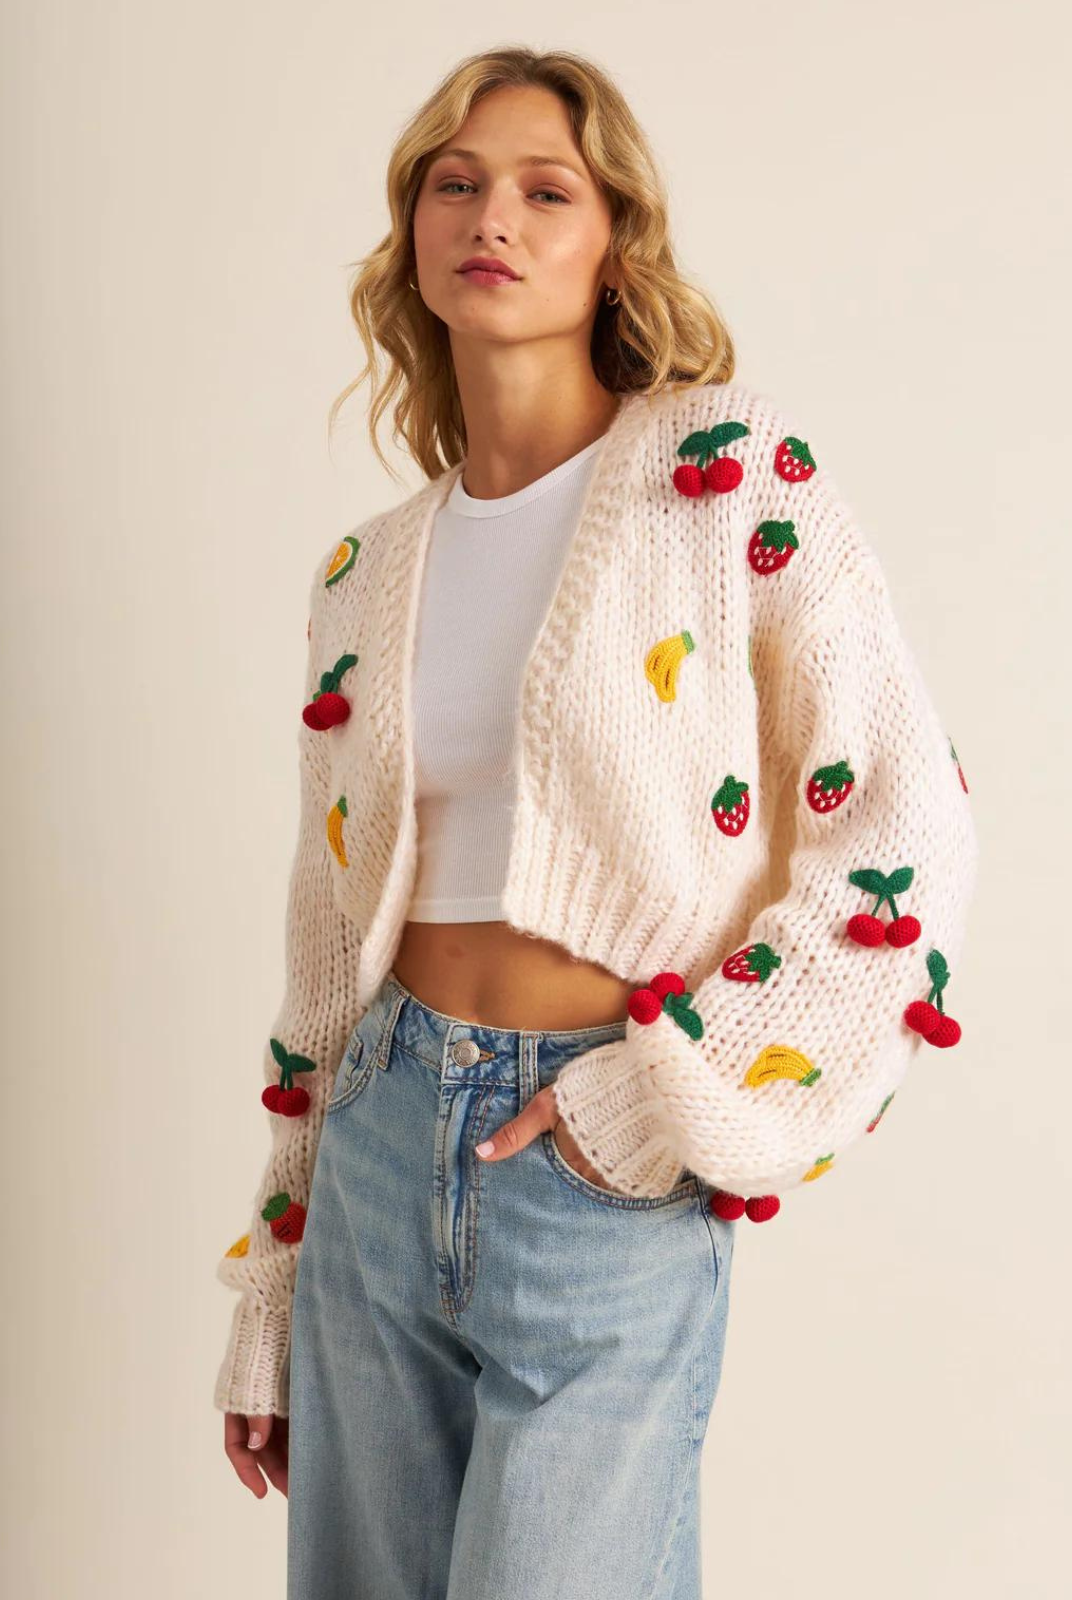 John & Jenn Rio Cardigan- Sunday Market. We don't like to pick favourites, but this open cardigan feels so special and really might be our absolute fav of the season. Stand out with this fruity cutie all season long!